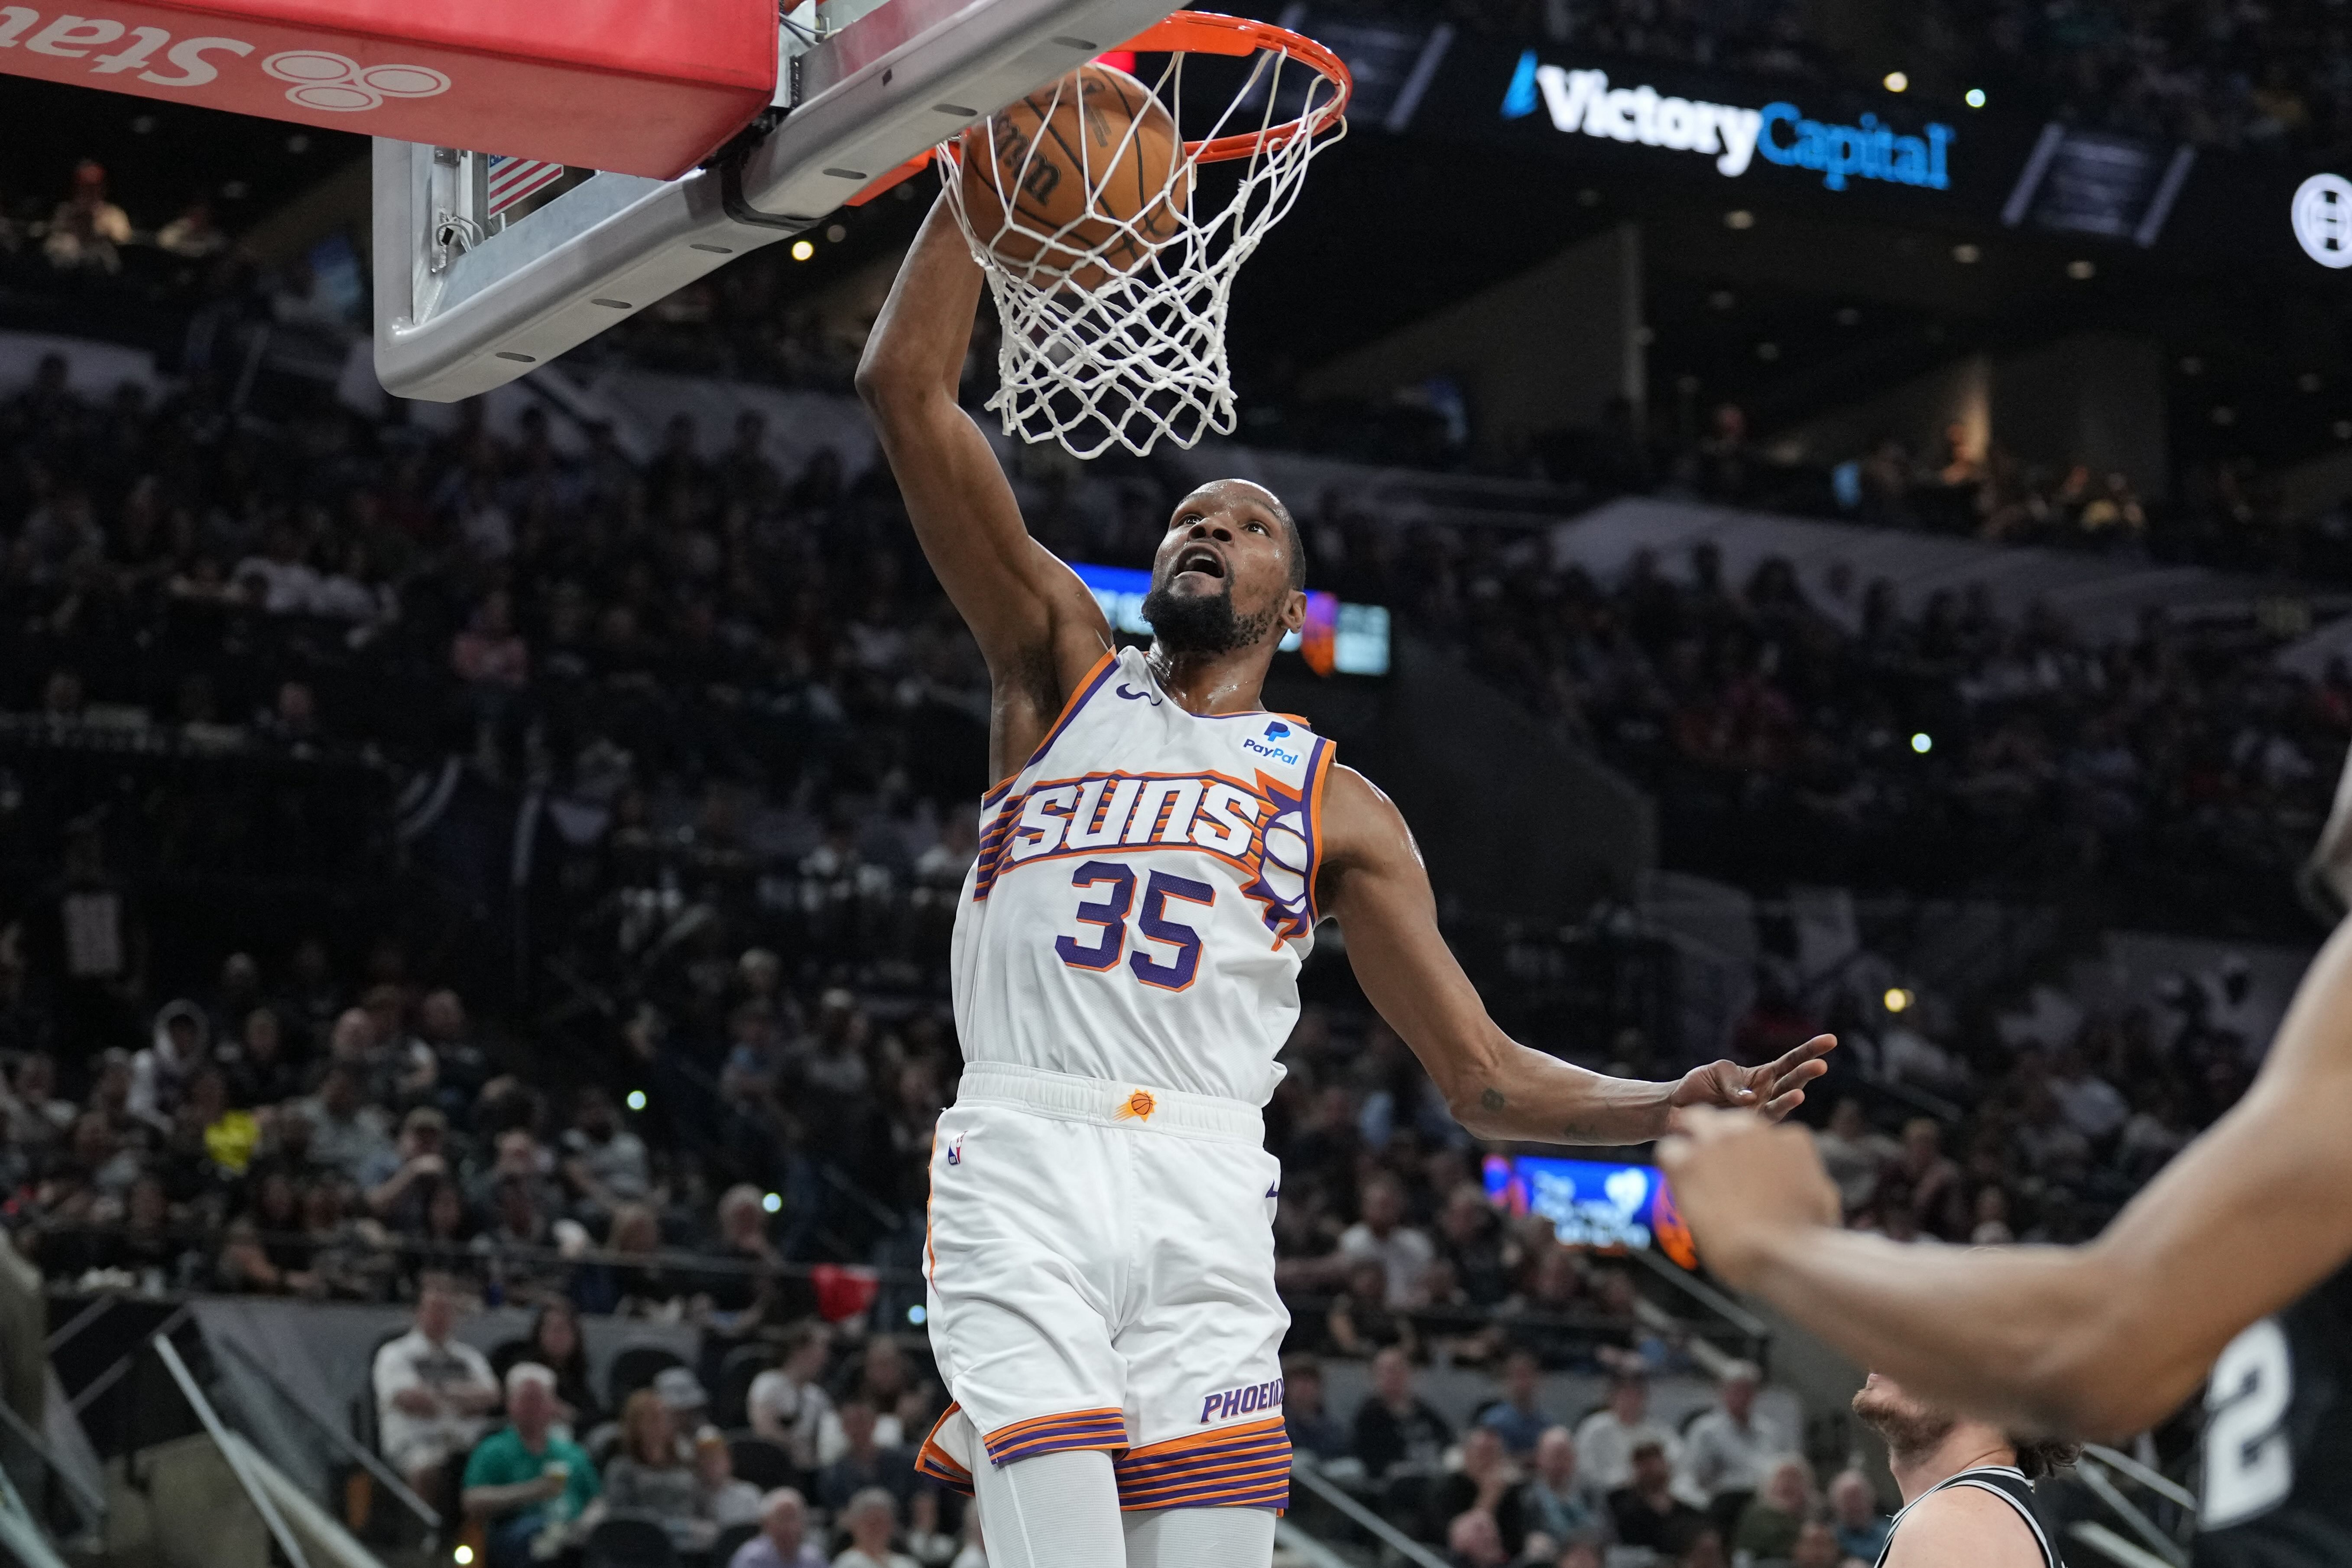 NBA: Booker, Durant combine for 57 points as Suns crush Spurs